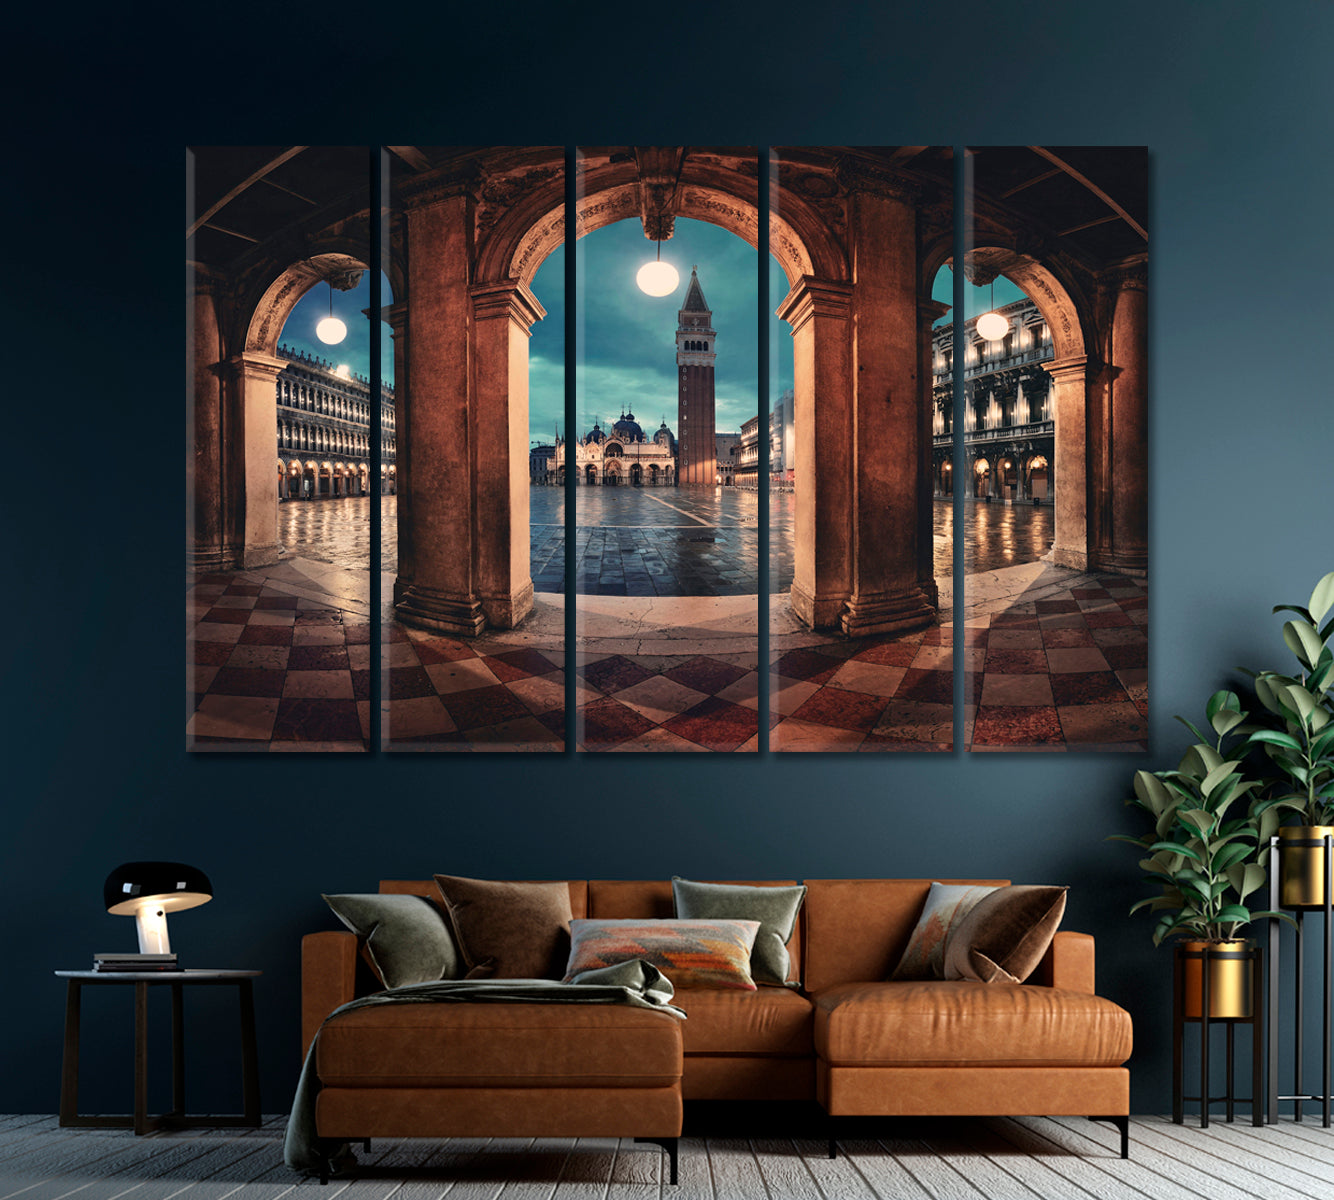 Night View of Piazza San Marco in Venice Italy Canvas Print-Canvas Print-CetArt-1 Panel-24x16 inches-CetArt